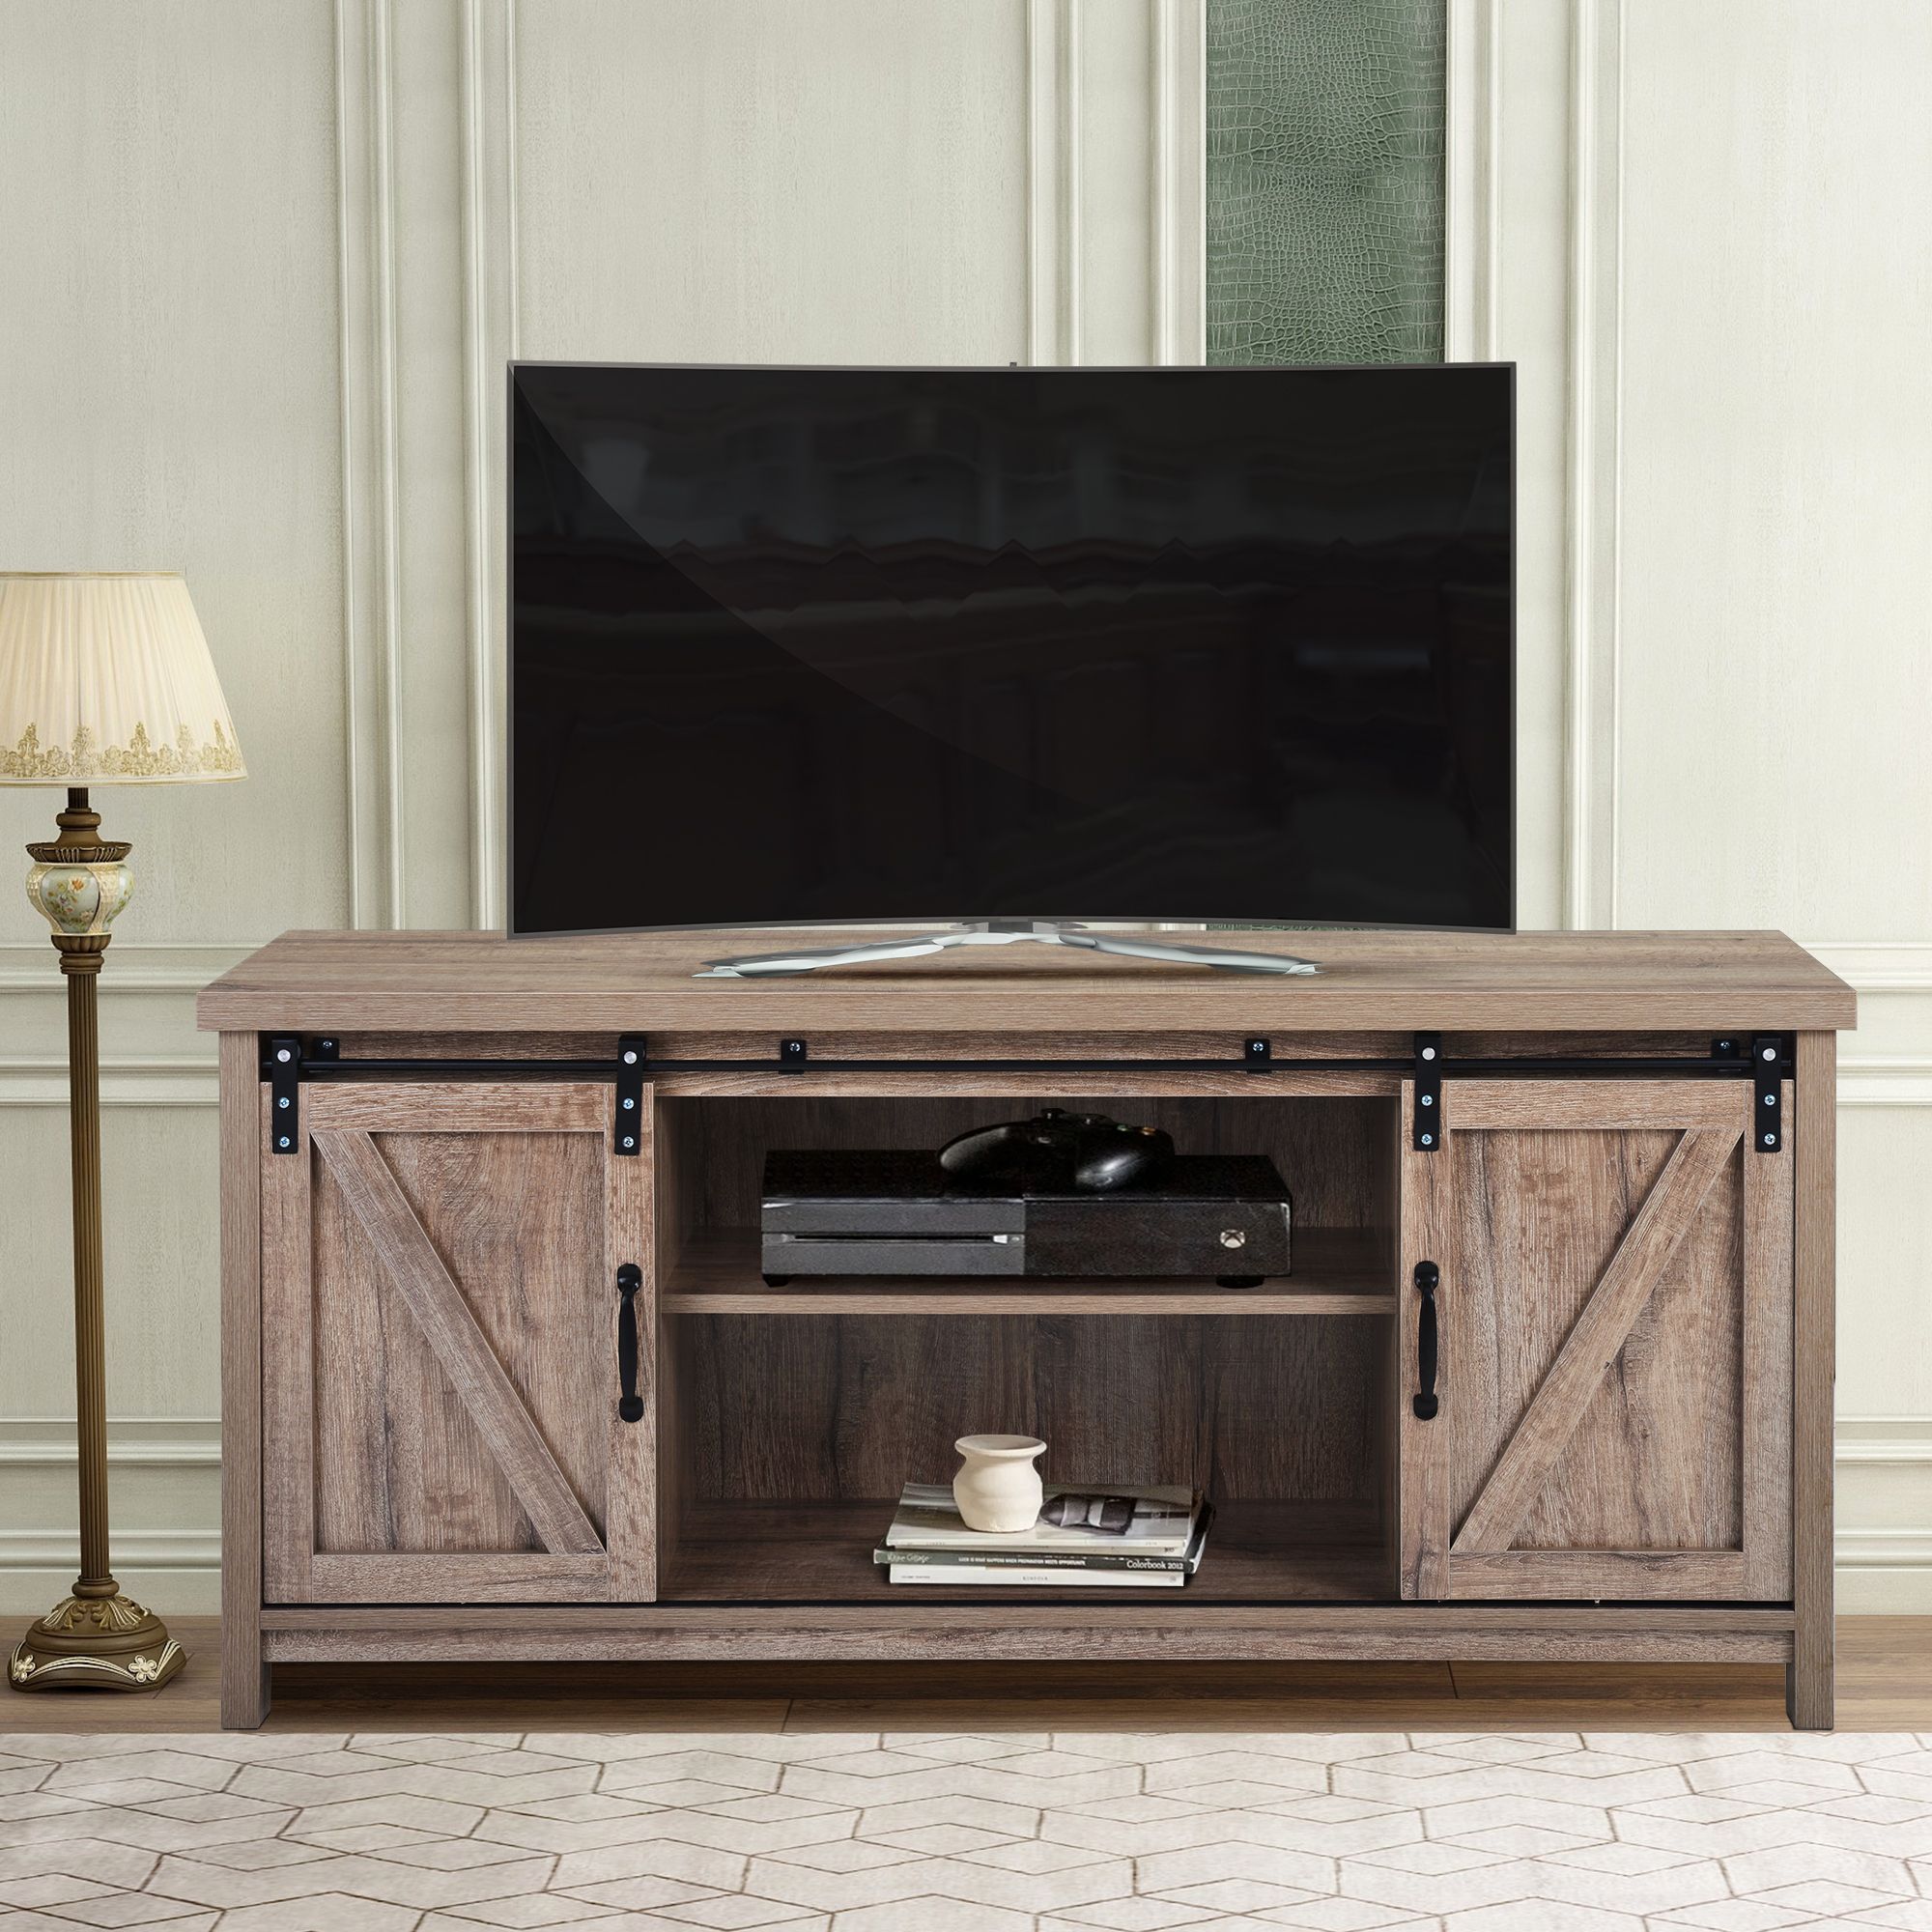 Wood Tv Stand, Modern Corner Tv Table Stands, Rustic Style Throughout Modern 2 Glass Door Corner Tv Stands (View 4 of 15)